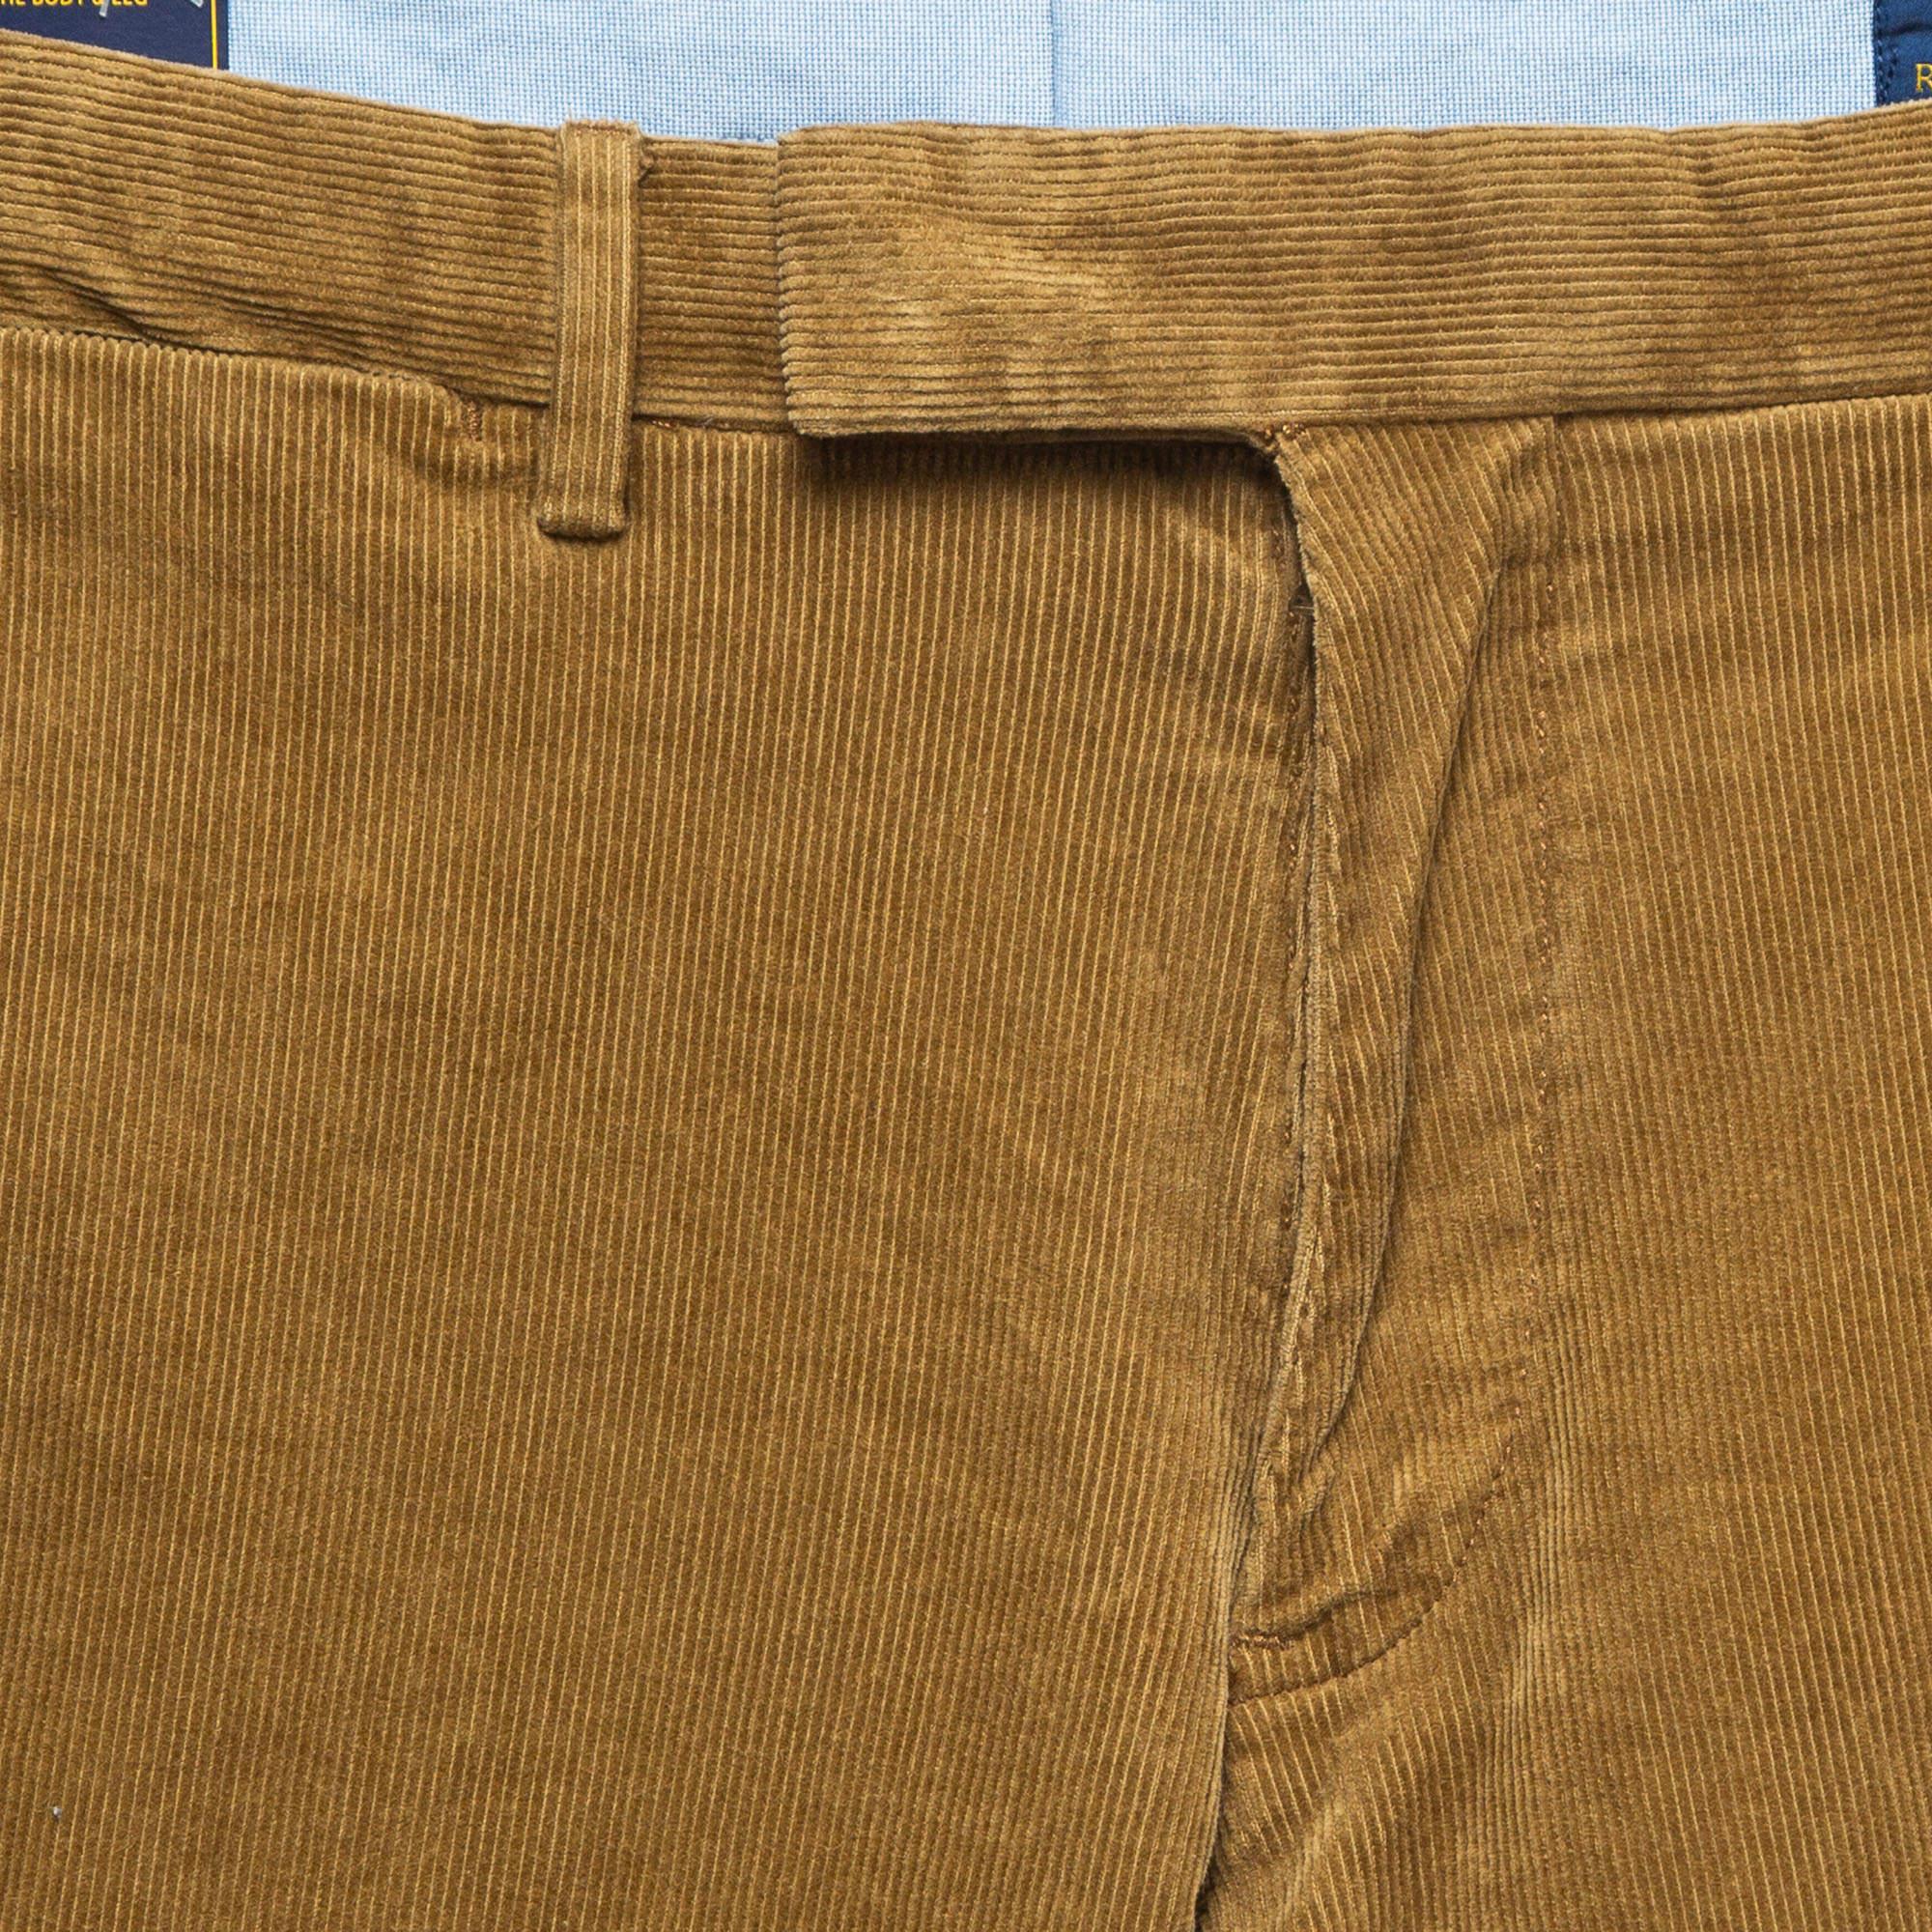 Polo Ralph Lauren Brown Corduroy Stretch Slim Fit Hose L Taille 31